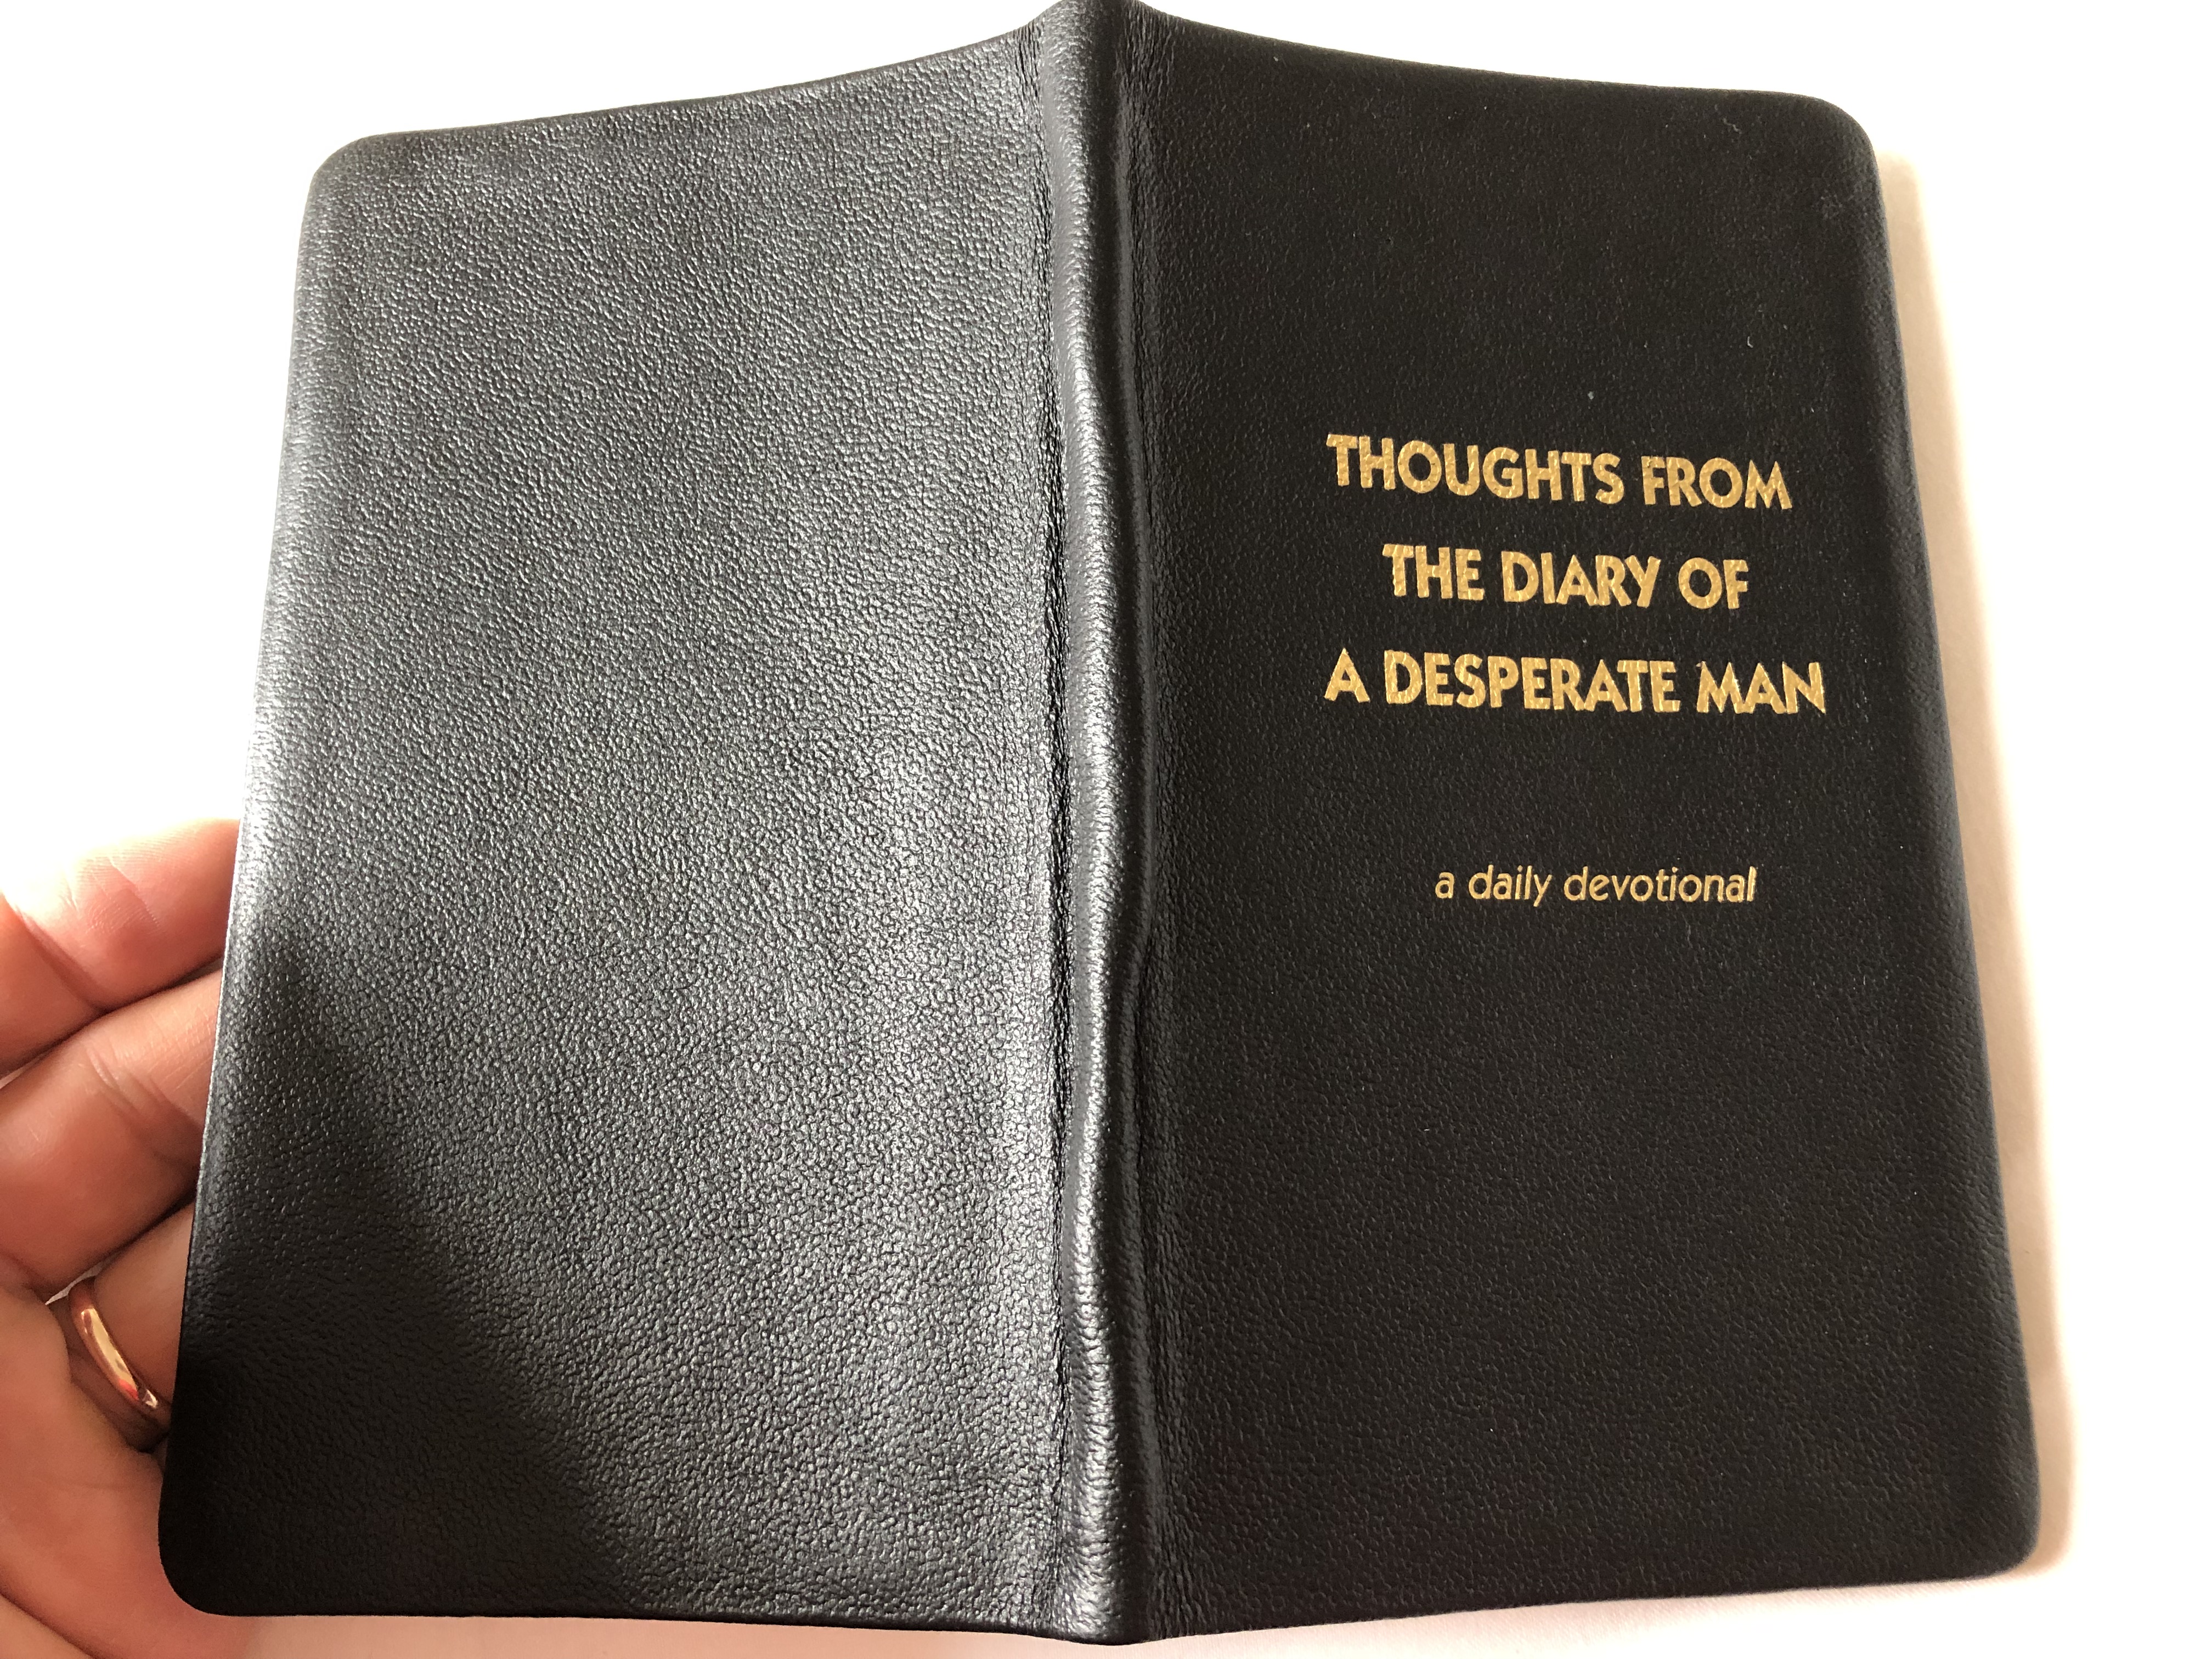 thoughts-from-the-diary-of-a-desperate-man-a-daily-devotional-by-walter-a.-henrichsen-11th-edition-leadership-foundation-golden-edges-leatherbound-black-2010-11-.jpg